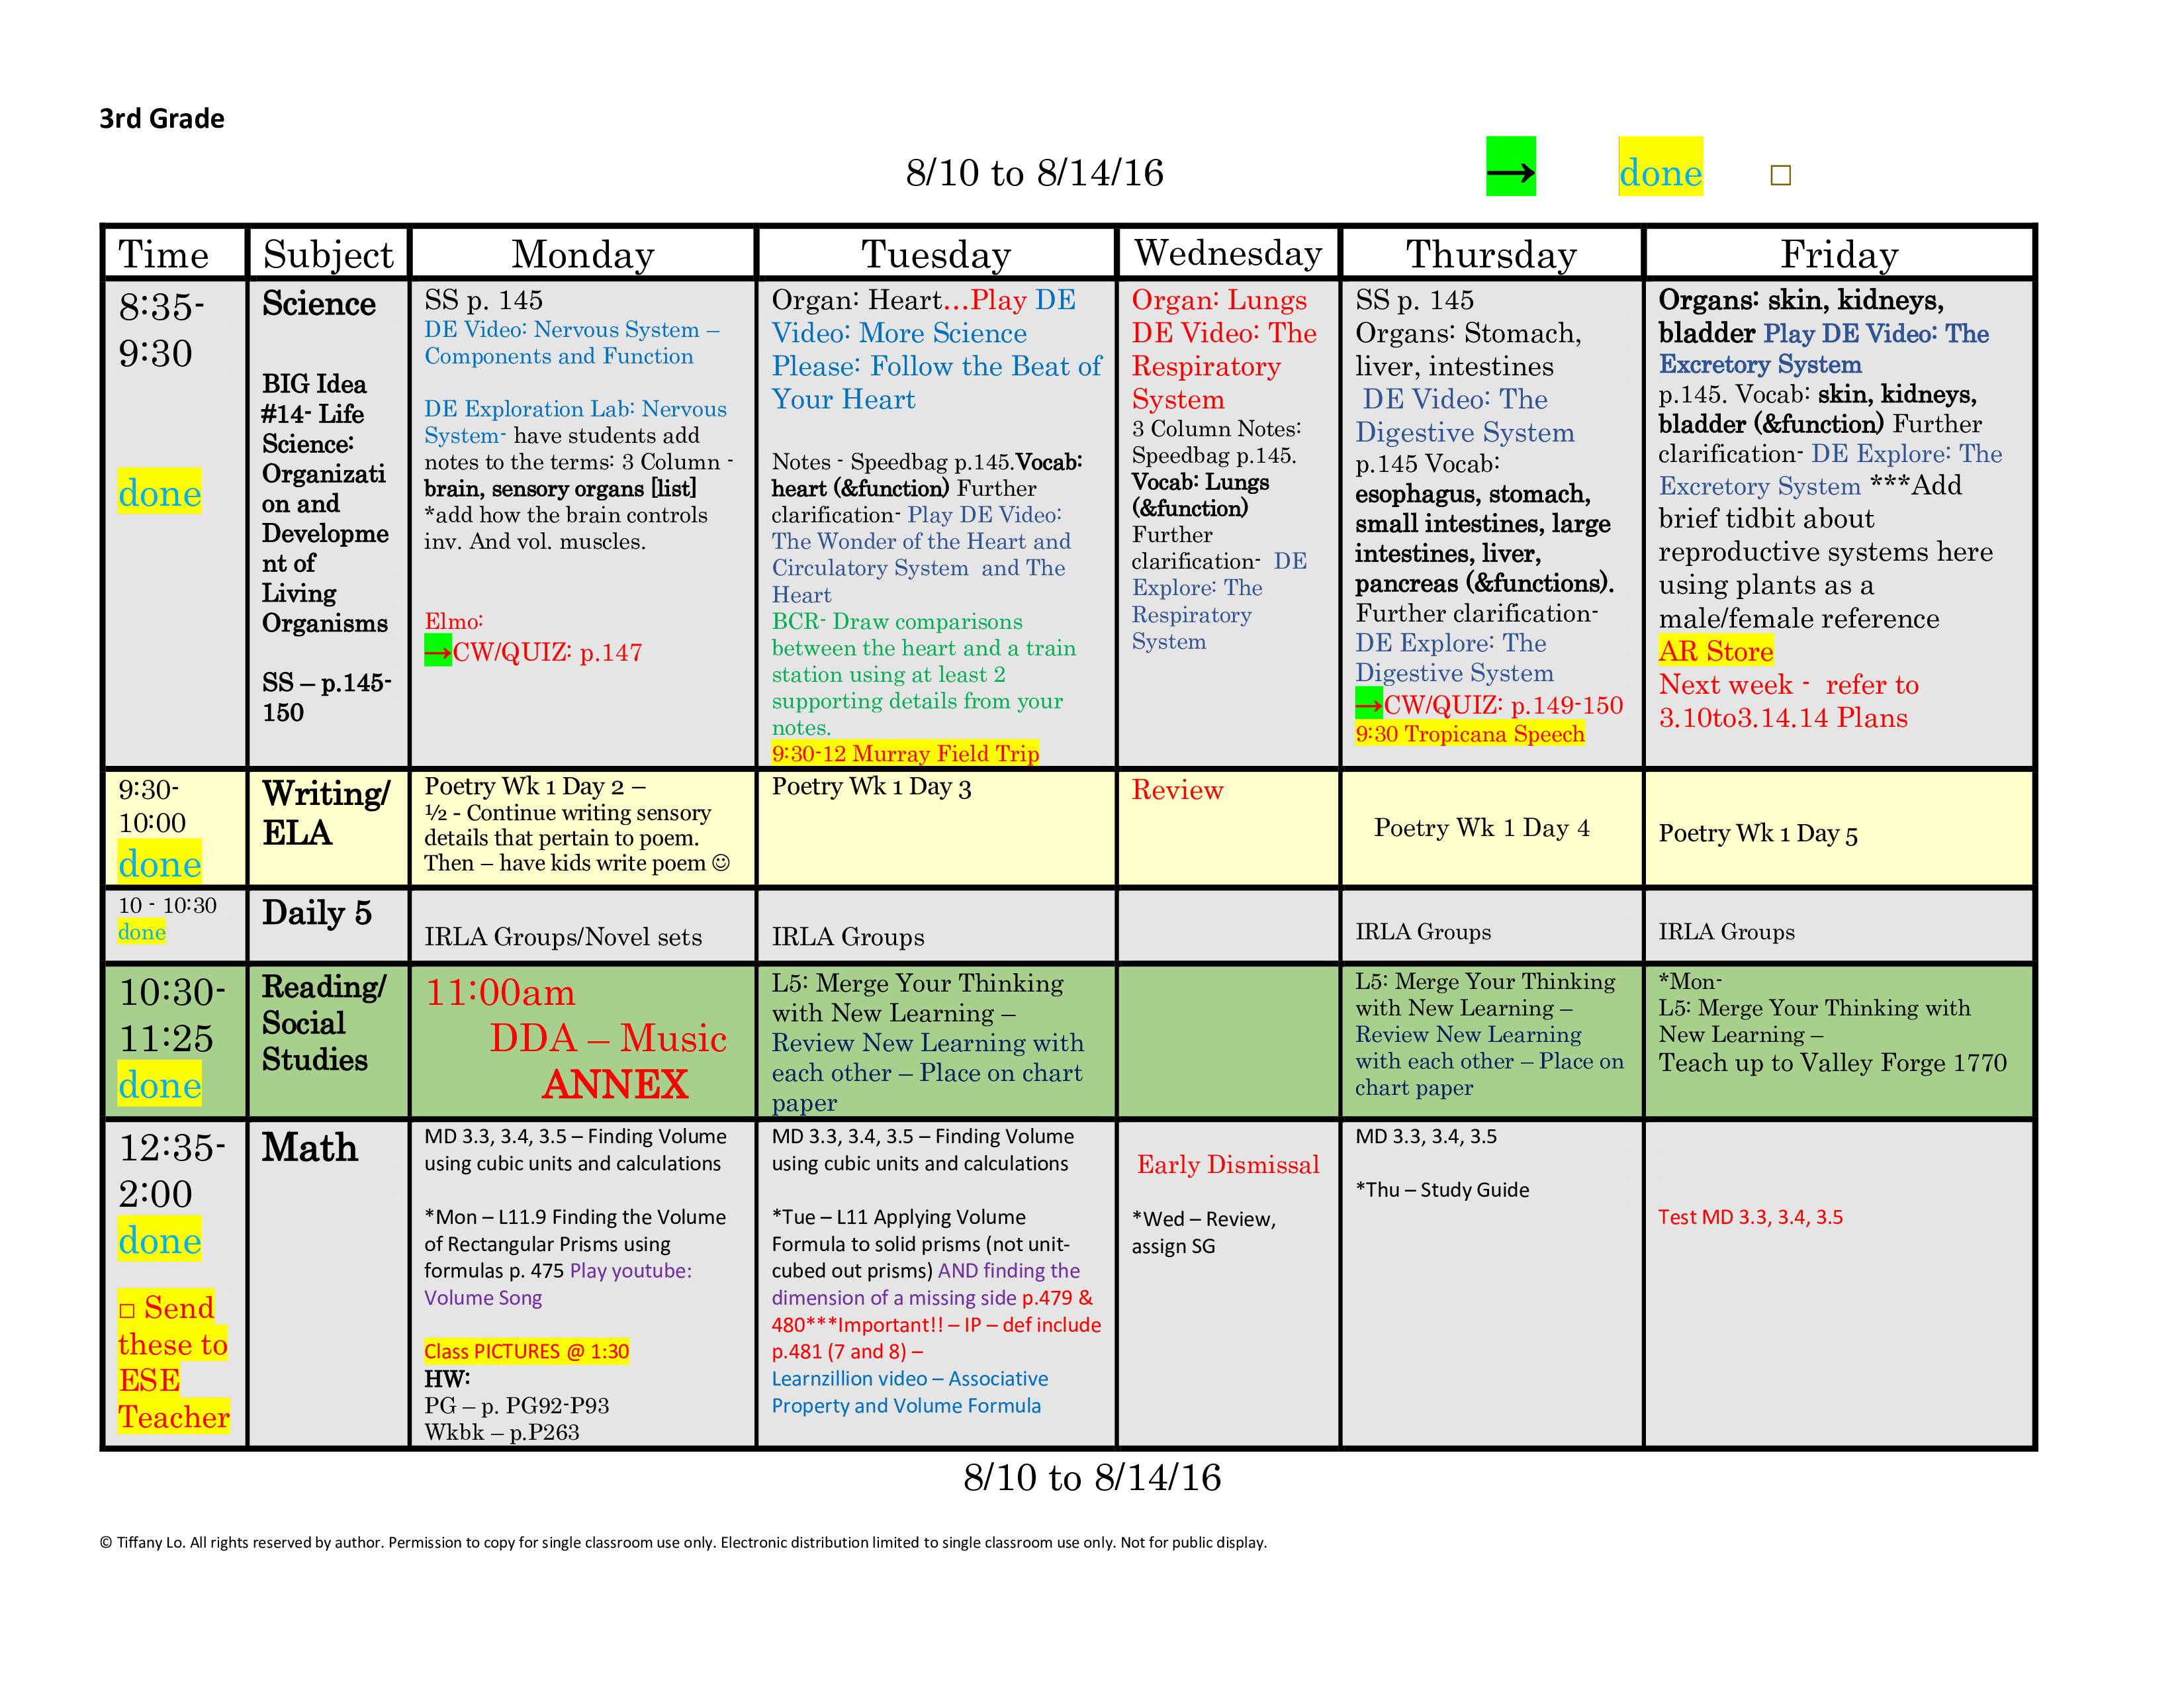 3rd-third-grade-lesson-plan-template-one-week-one-page-glance-of-all-subjects-with-common-core